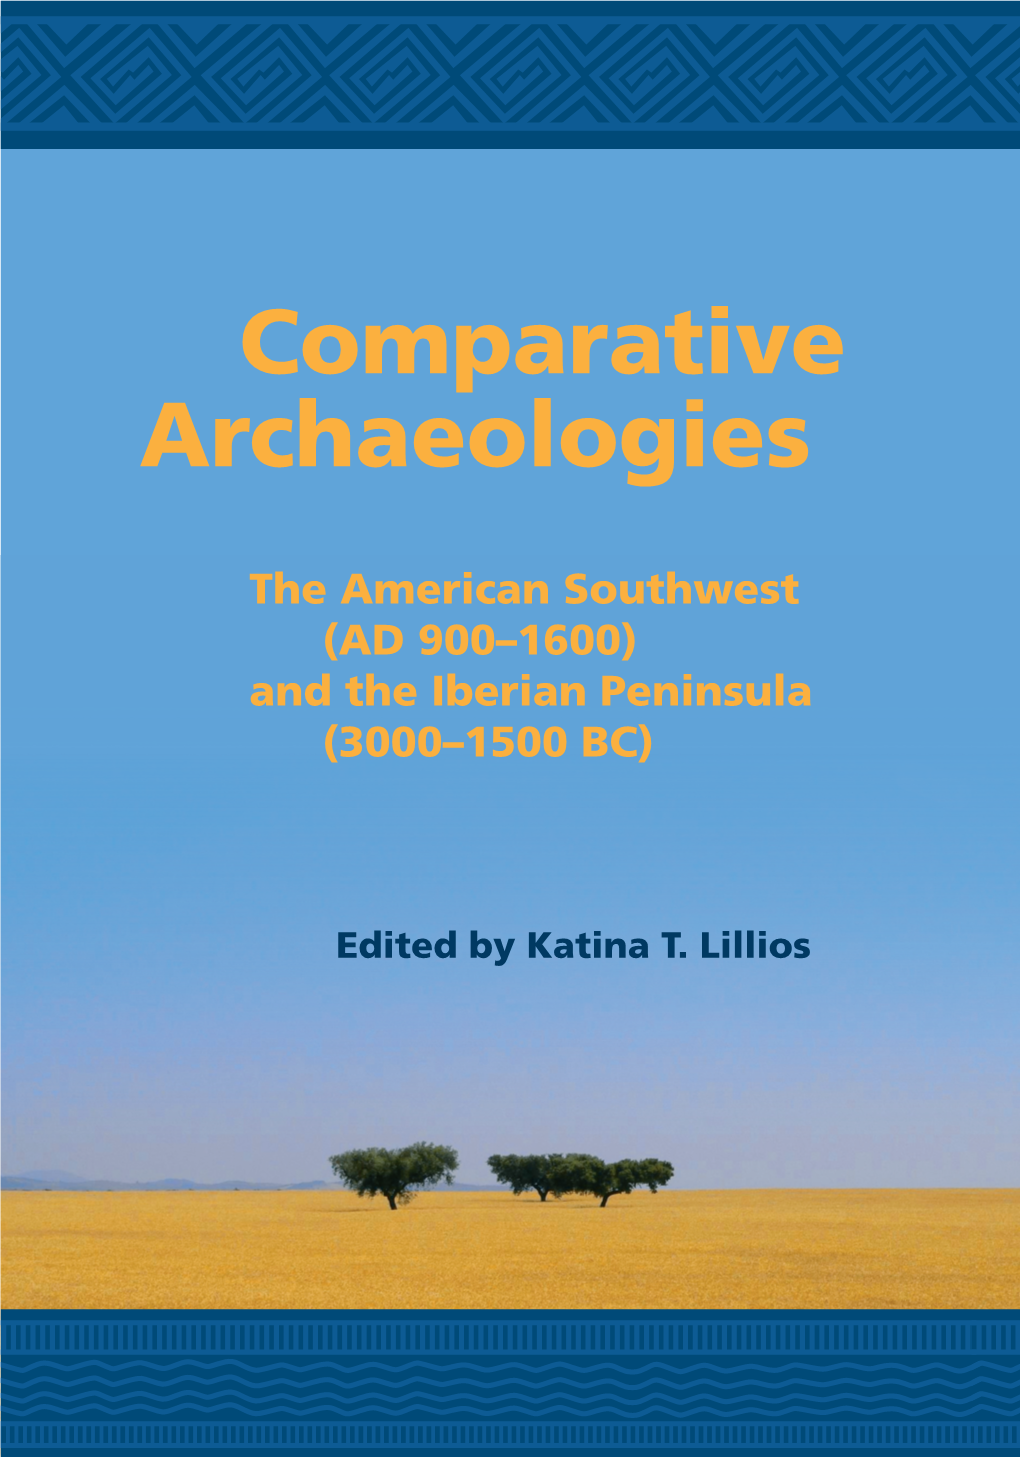 Archaeologies Comparative